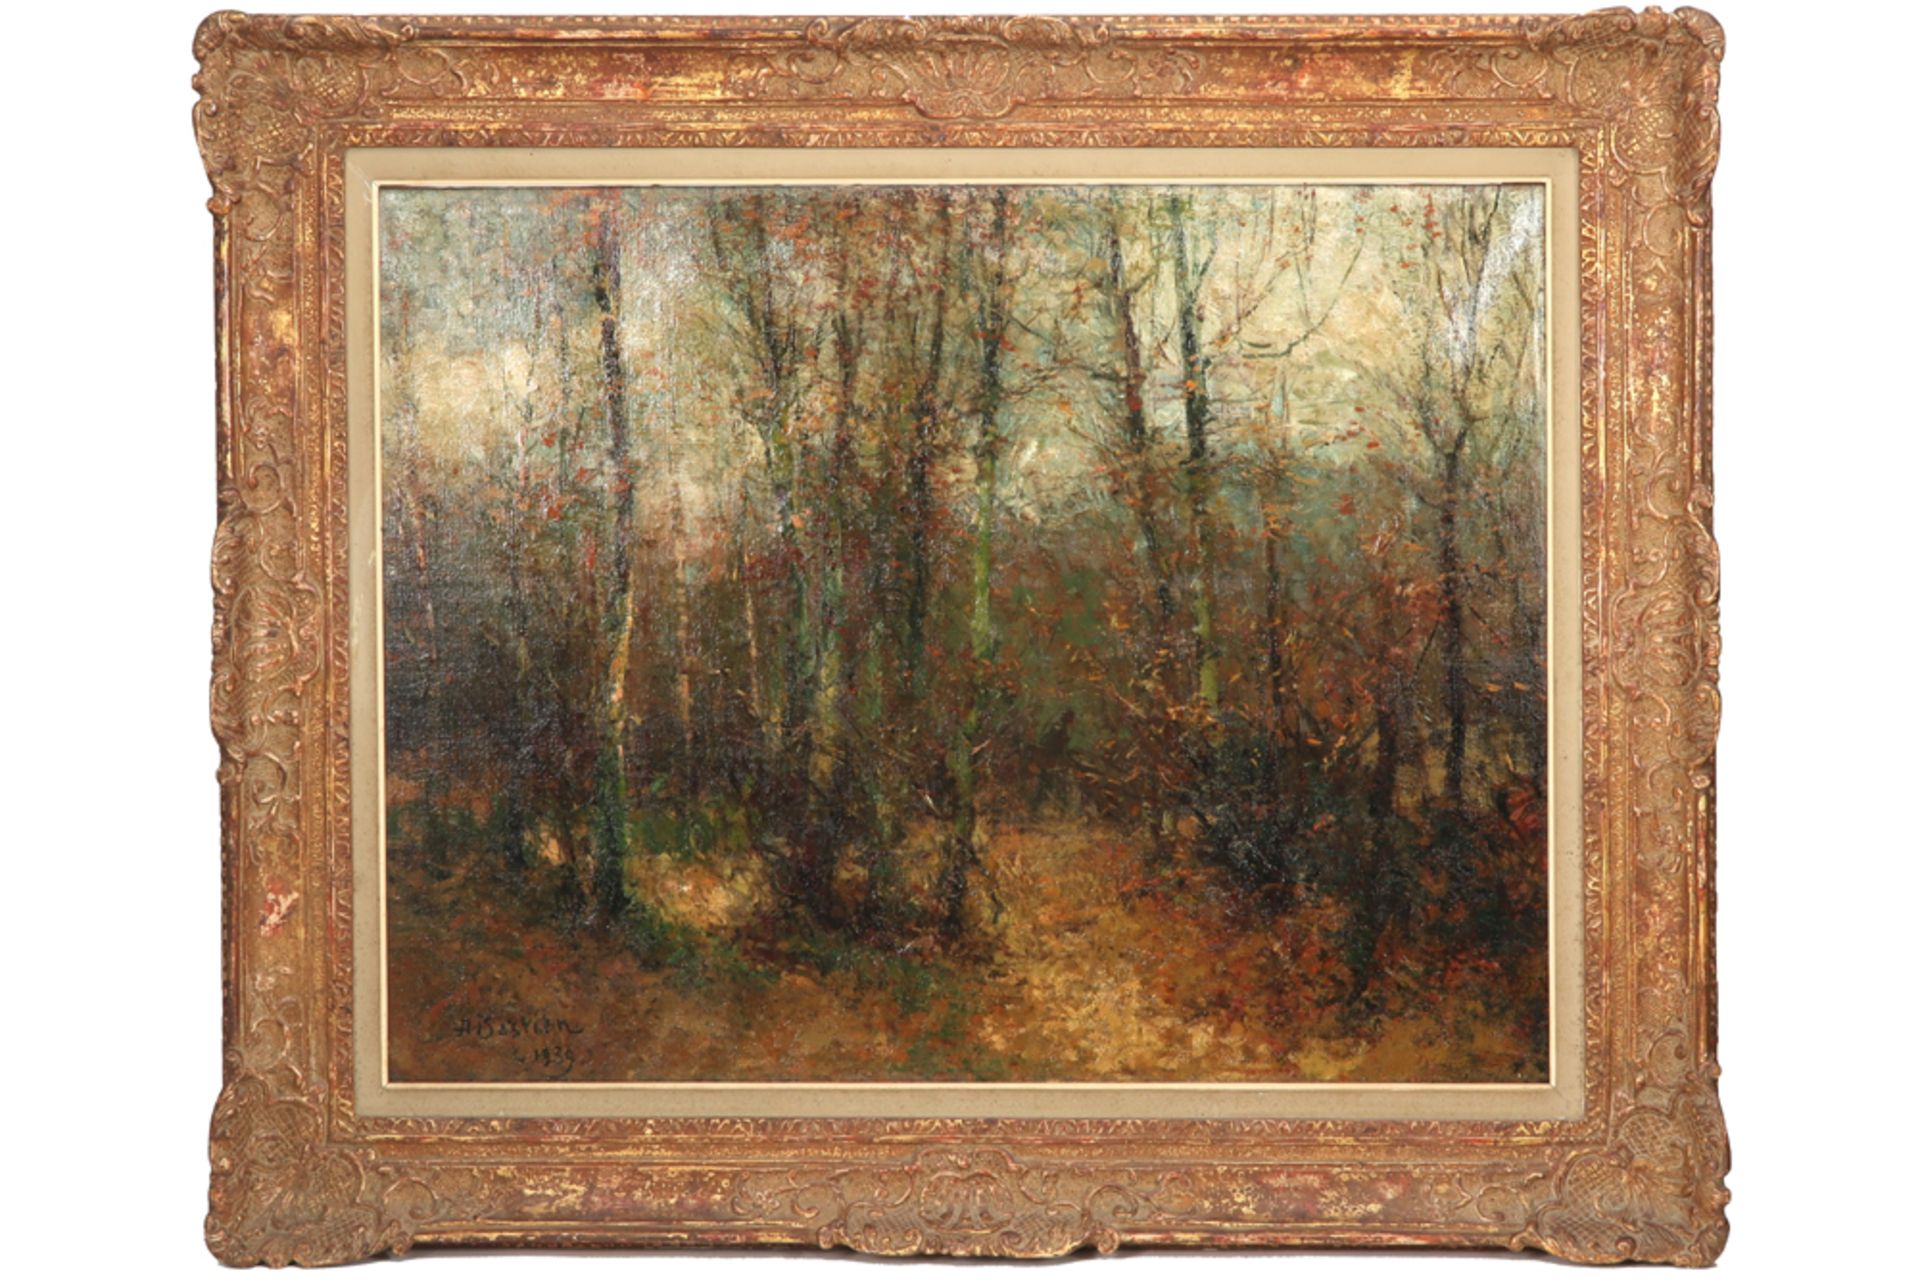 20th Cent. Belgian oil on canvas - signed Alfred Bastien and dated 1939 || BASTIEN ALFRED, THÉODORE, - Image 3 of 4